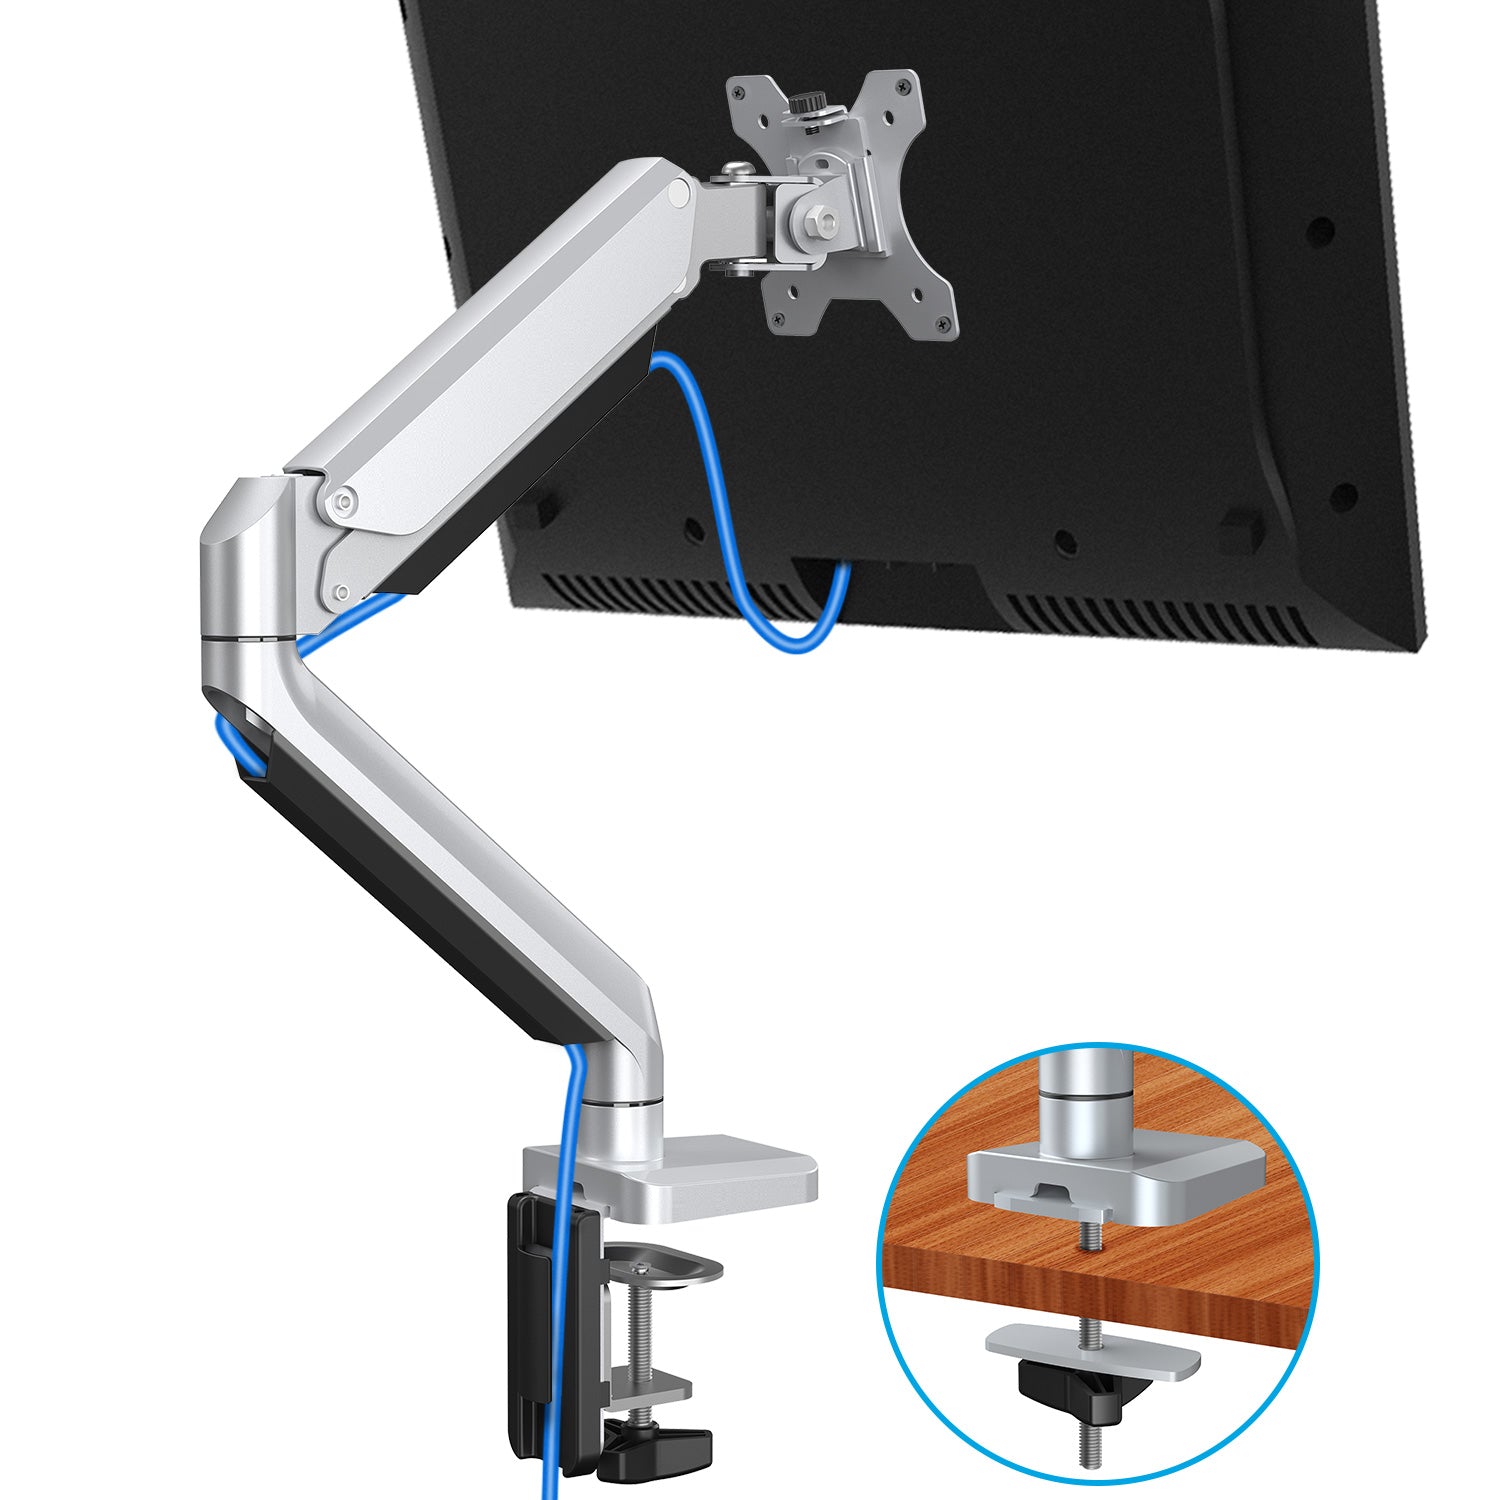 Dual Monitor Desk Mount, Cast Aluminum, Height Adjustable Monitor Stand, Articulating Gas Spring Monitor Arm - Fits 2 Computer Screens Up to 32 inch